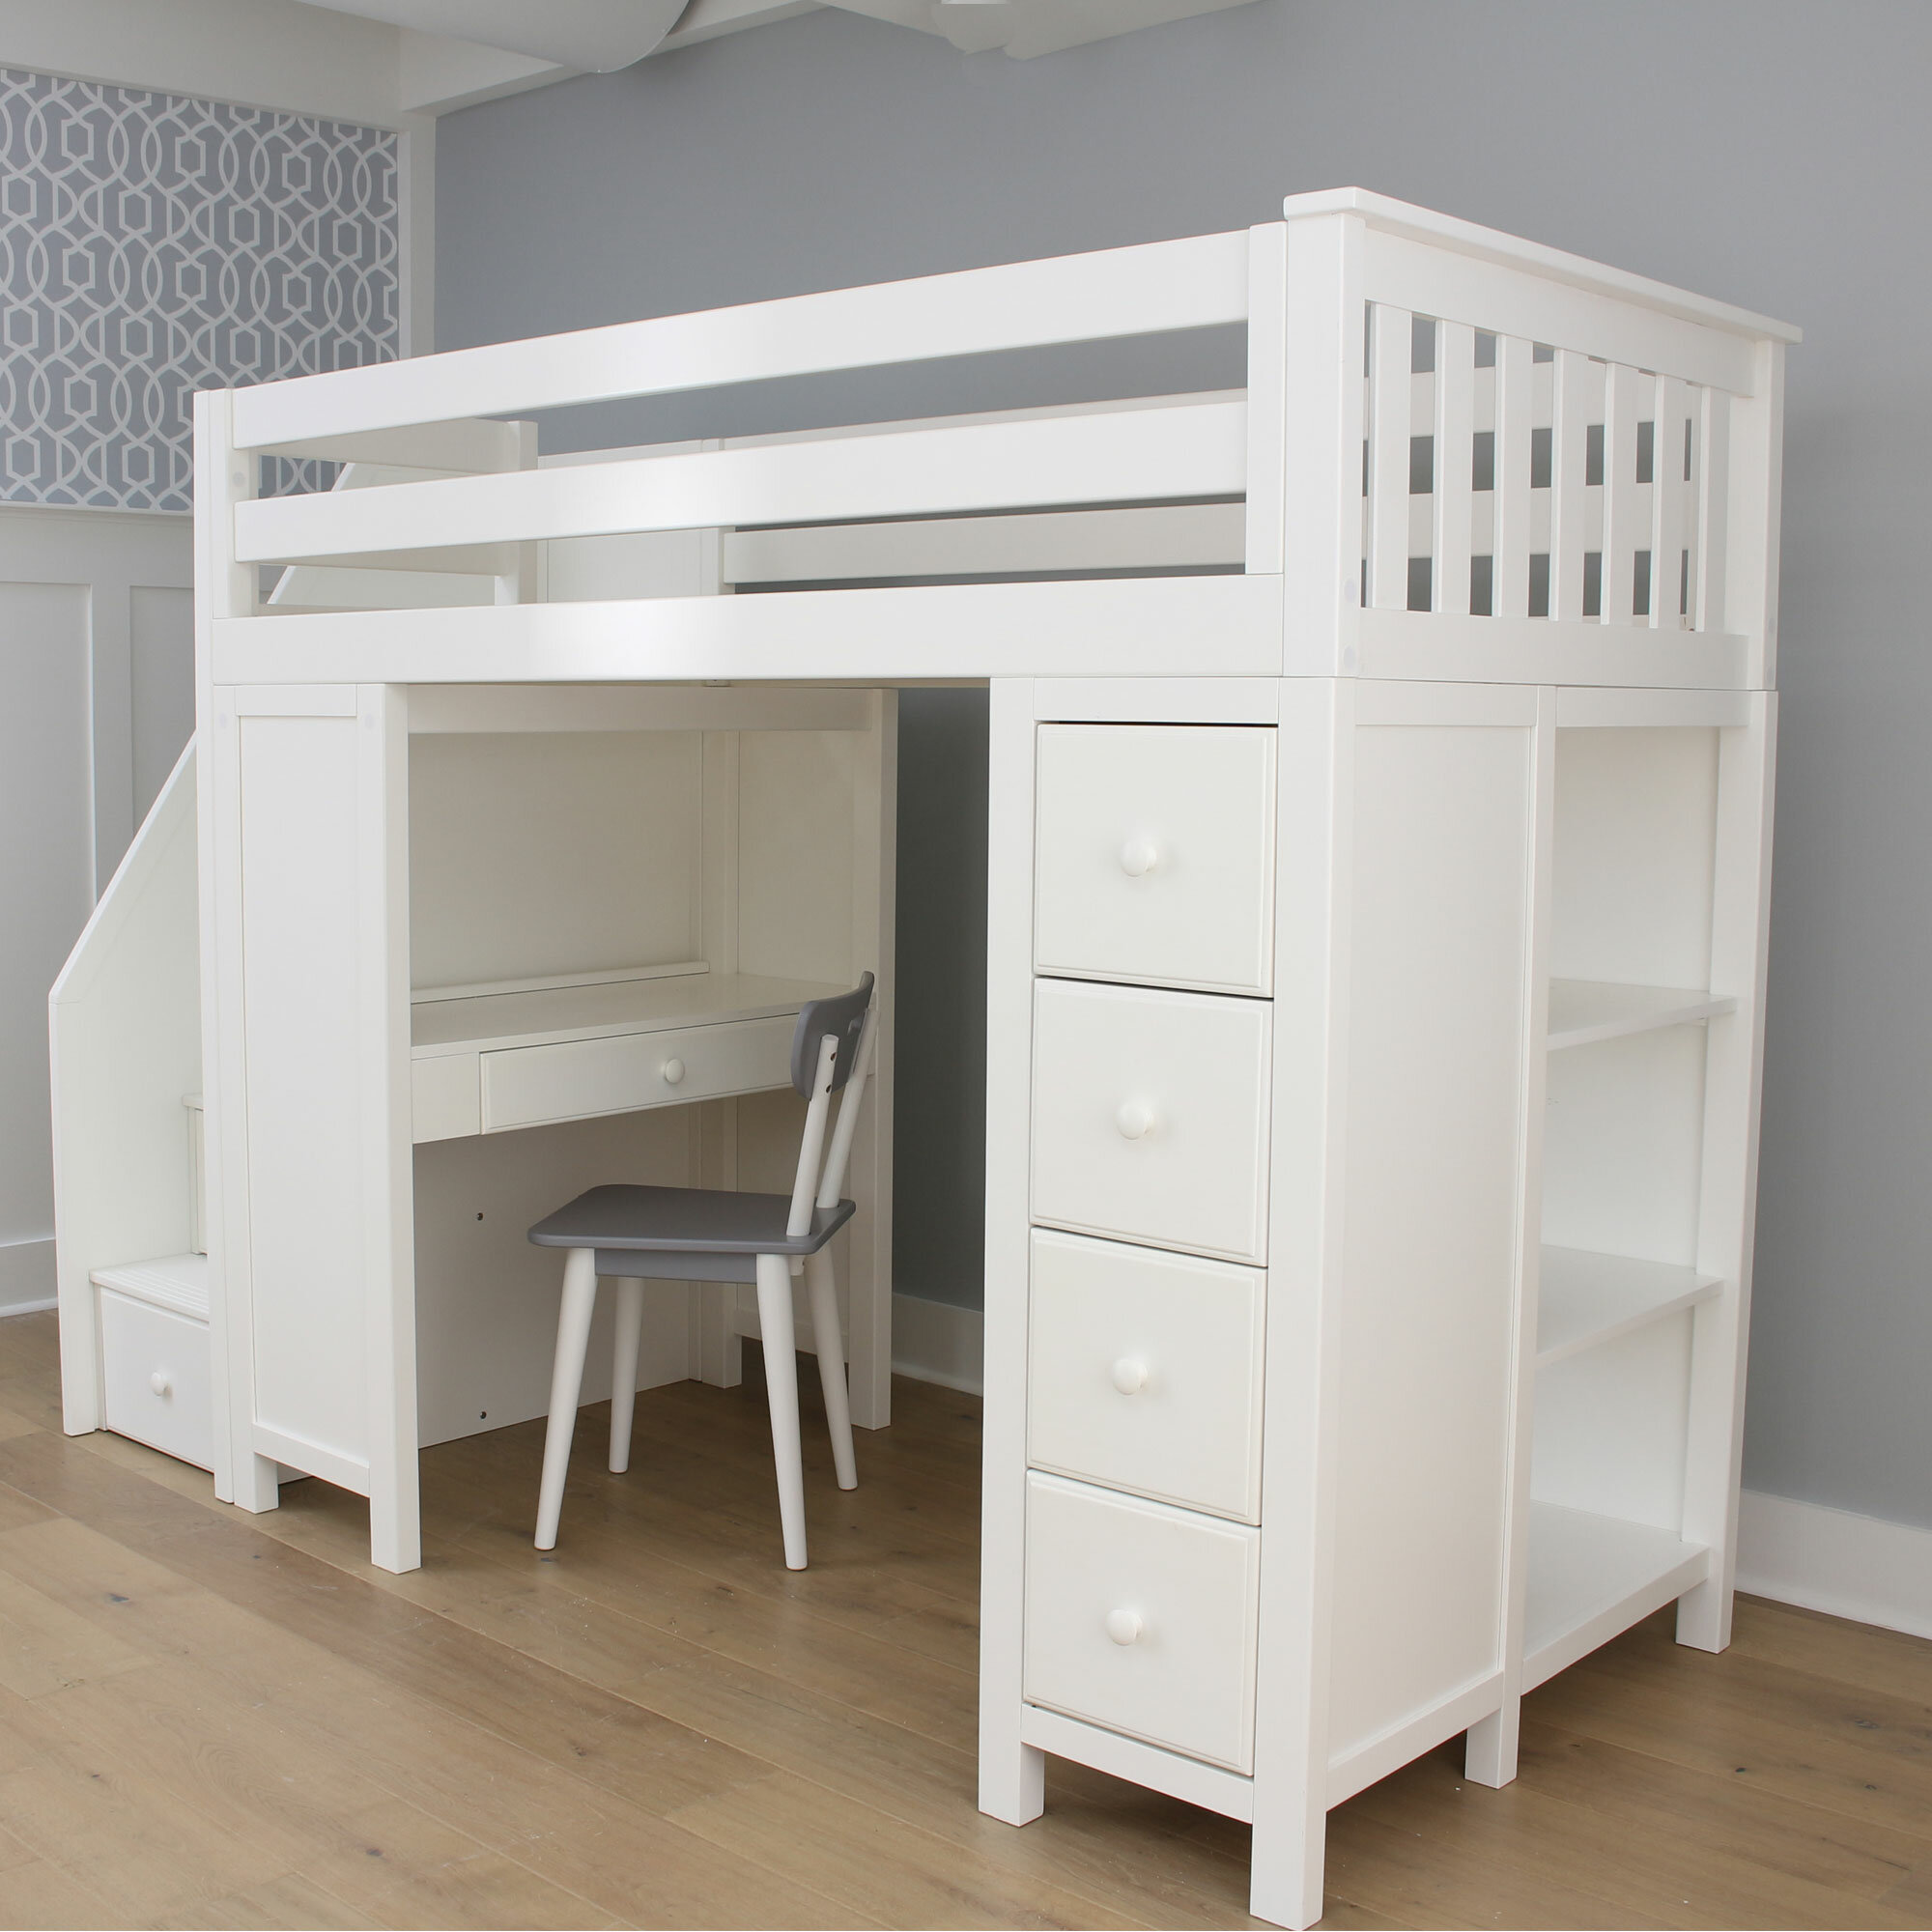 Harriet Bee Deshotel Twin Loft Bed With Drawers And Shelves